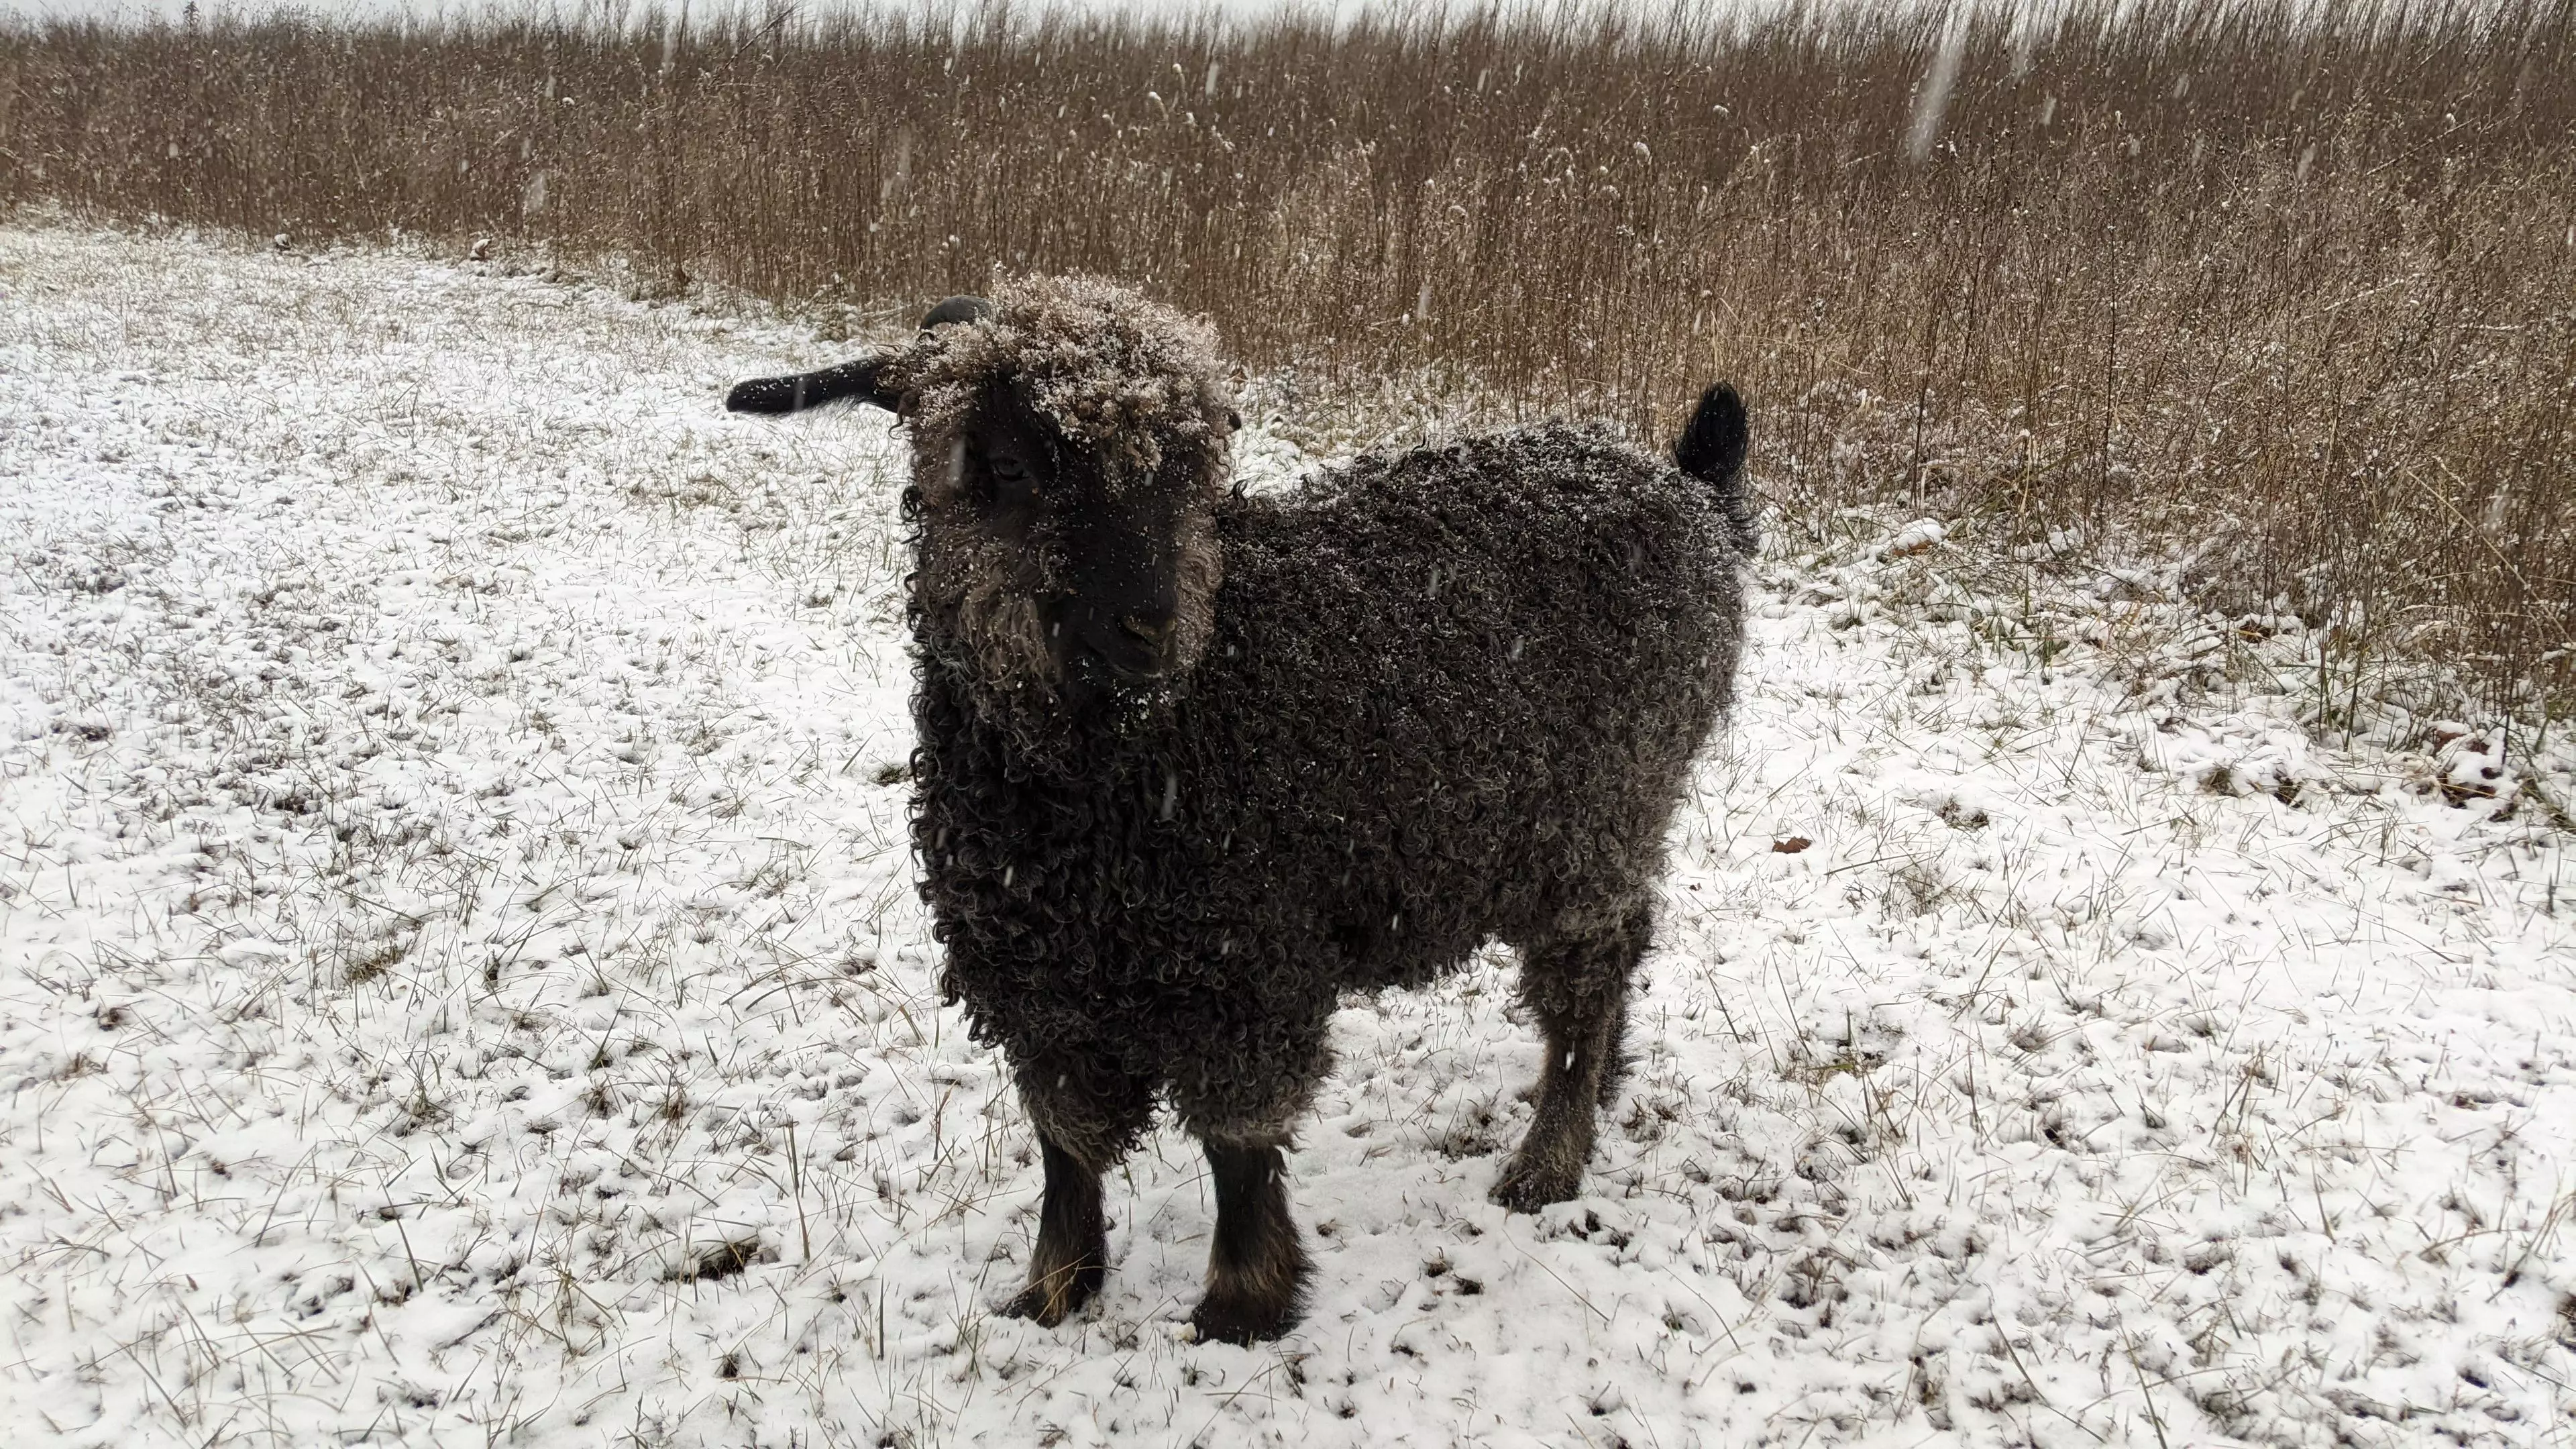 An image of a goat named Teff in the snow